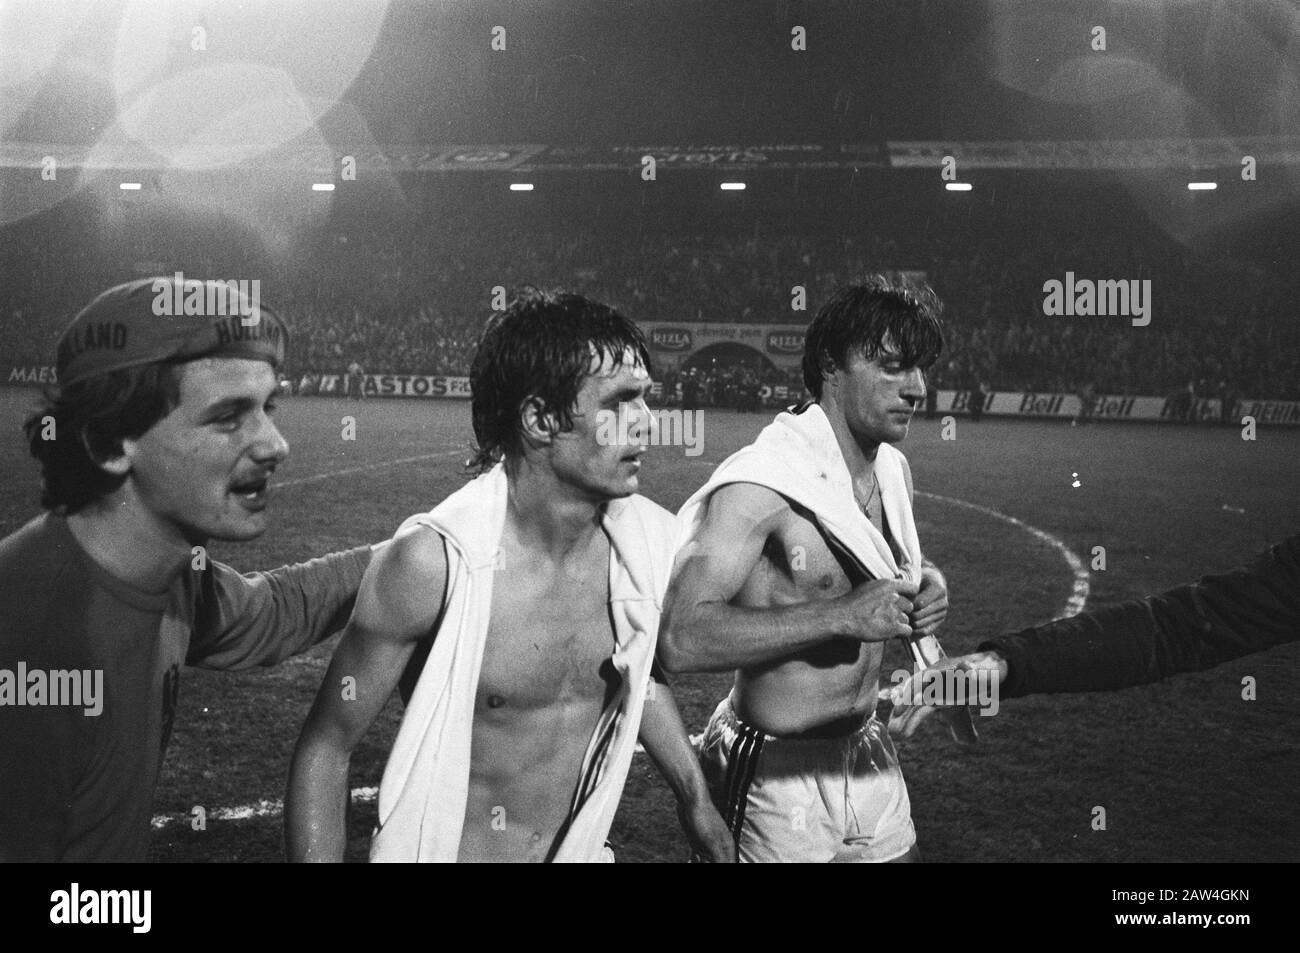 Qualifier Belgium - Netherlands, 0-2  Rep and Krol left the field Date: March 26, 1977 Location: Antwerp, Belgium Keywords: soccer, sports Person Name: Krol, Ruud, Rep , Johnny Stock Photo